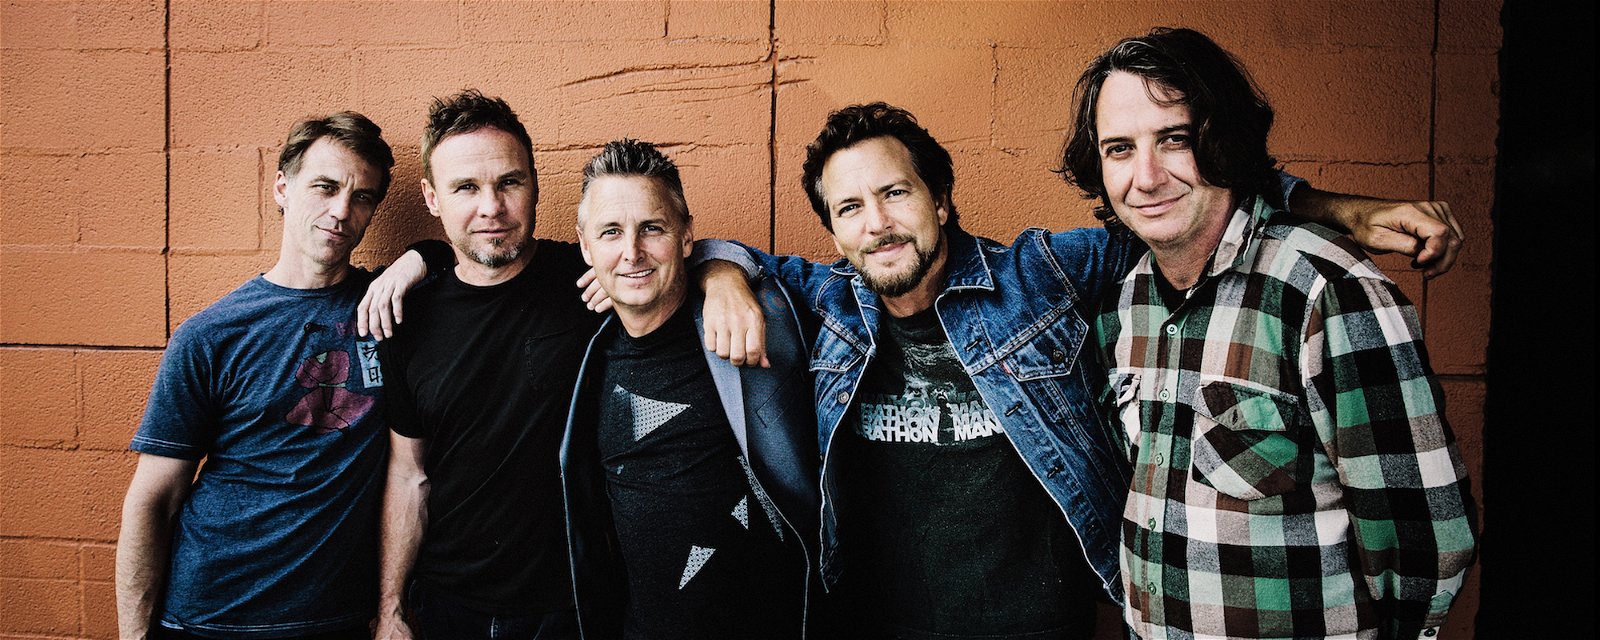 The Meaning Behind the Band Name: Pearl Jam - American